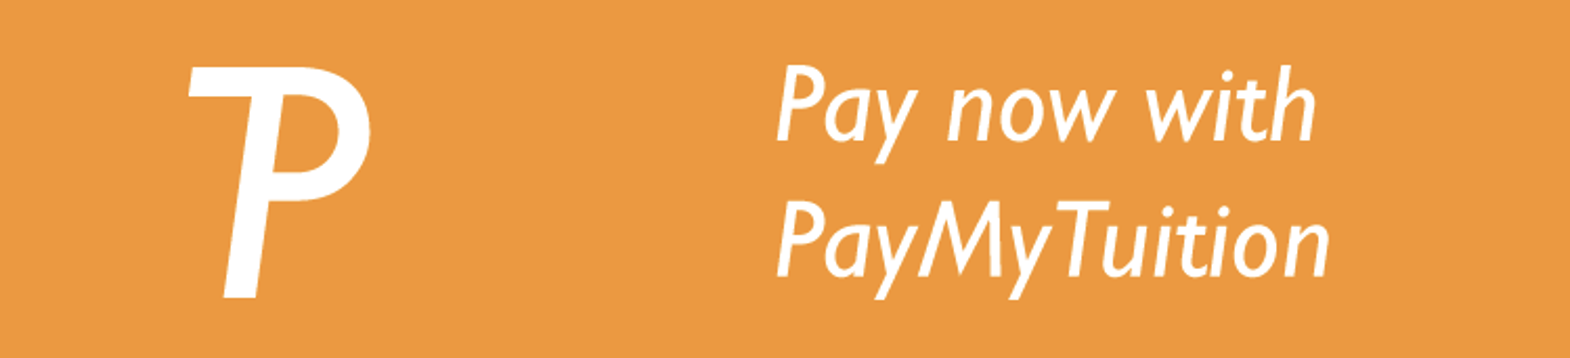 Pay my tuition logo 